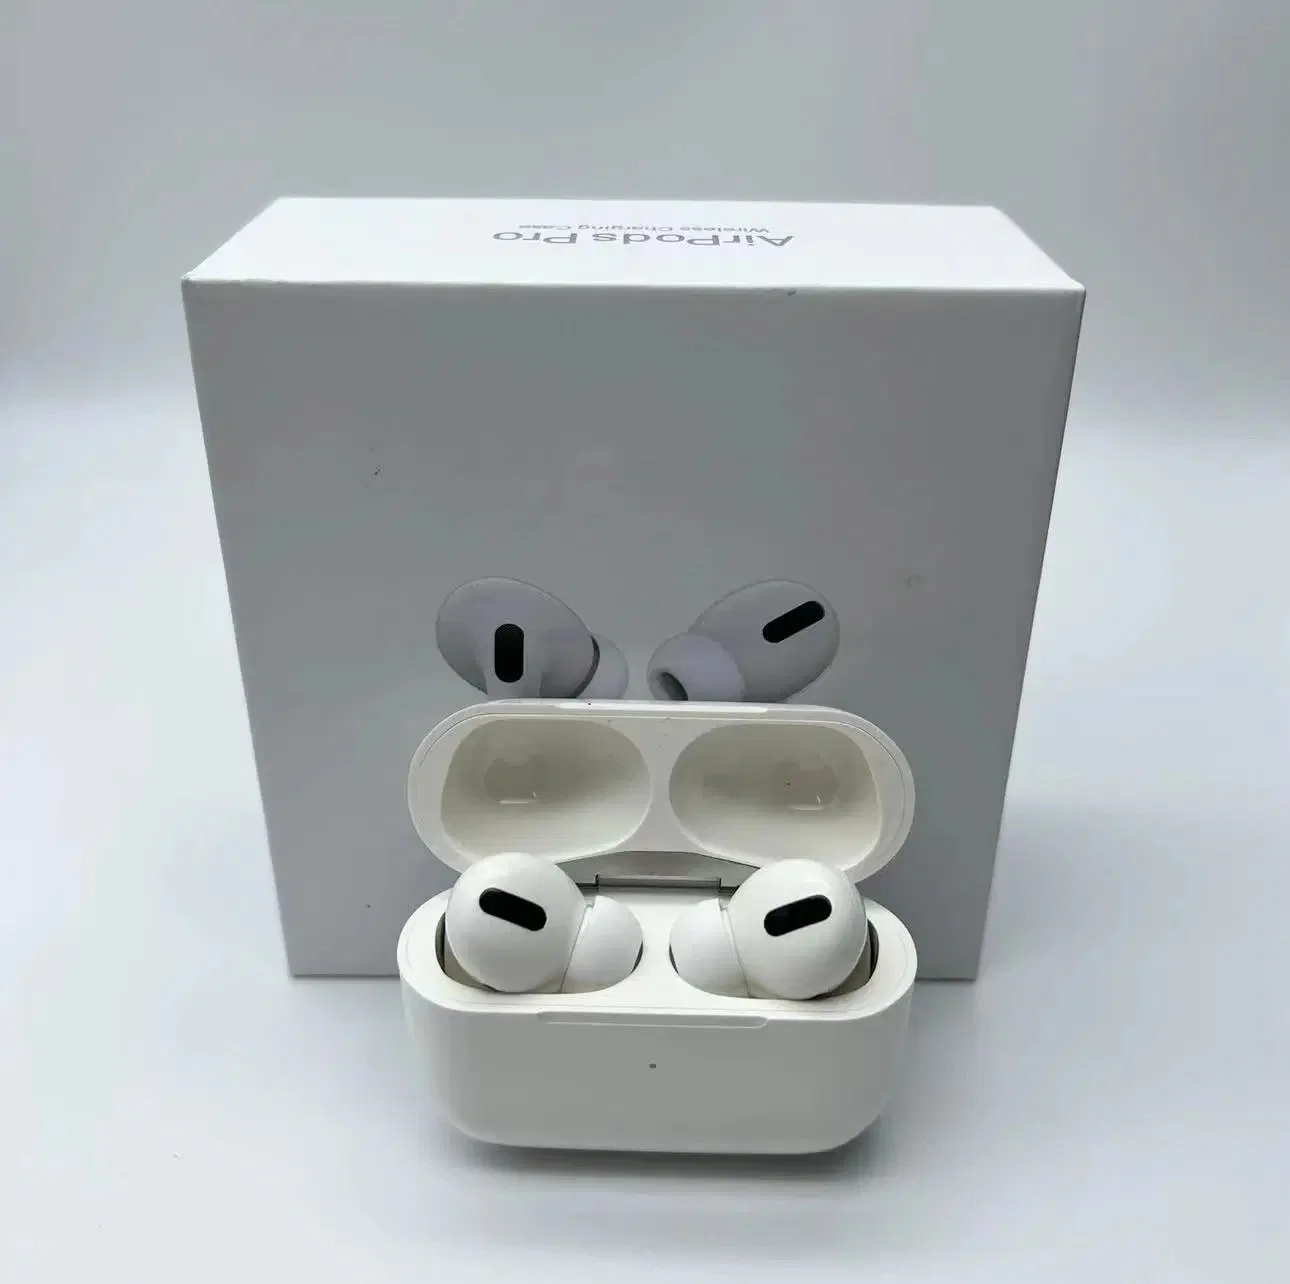 Airs 3rd Generation Wireless Bluetooth Earbuds Microphone Headphone 8892 Airoha Wireless Earphones Gaming Headset Airs PRO 3